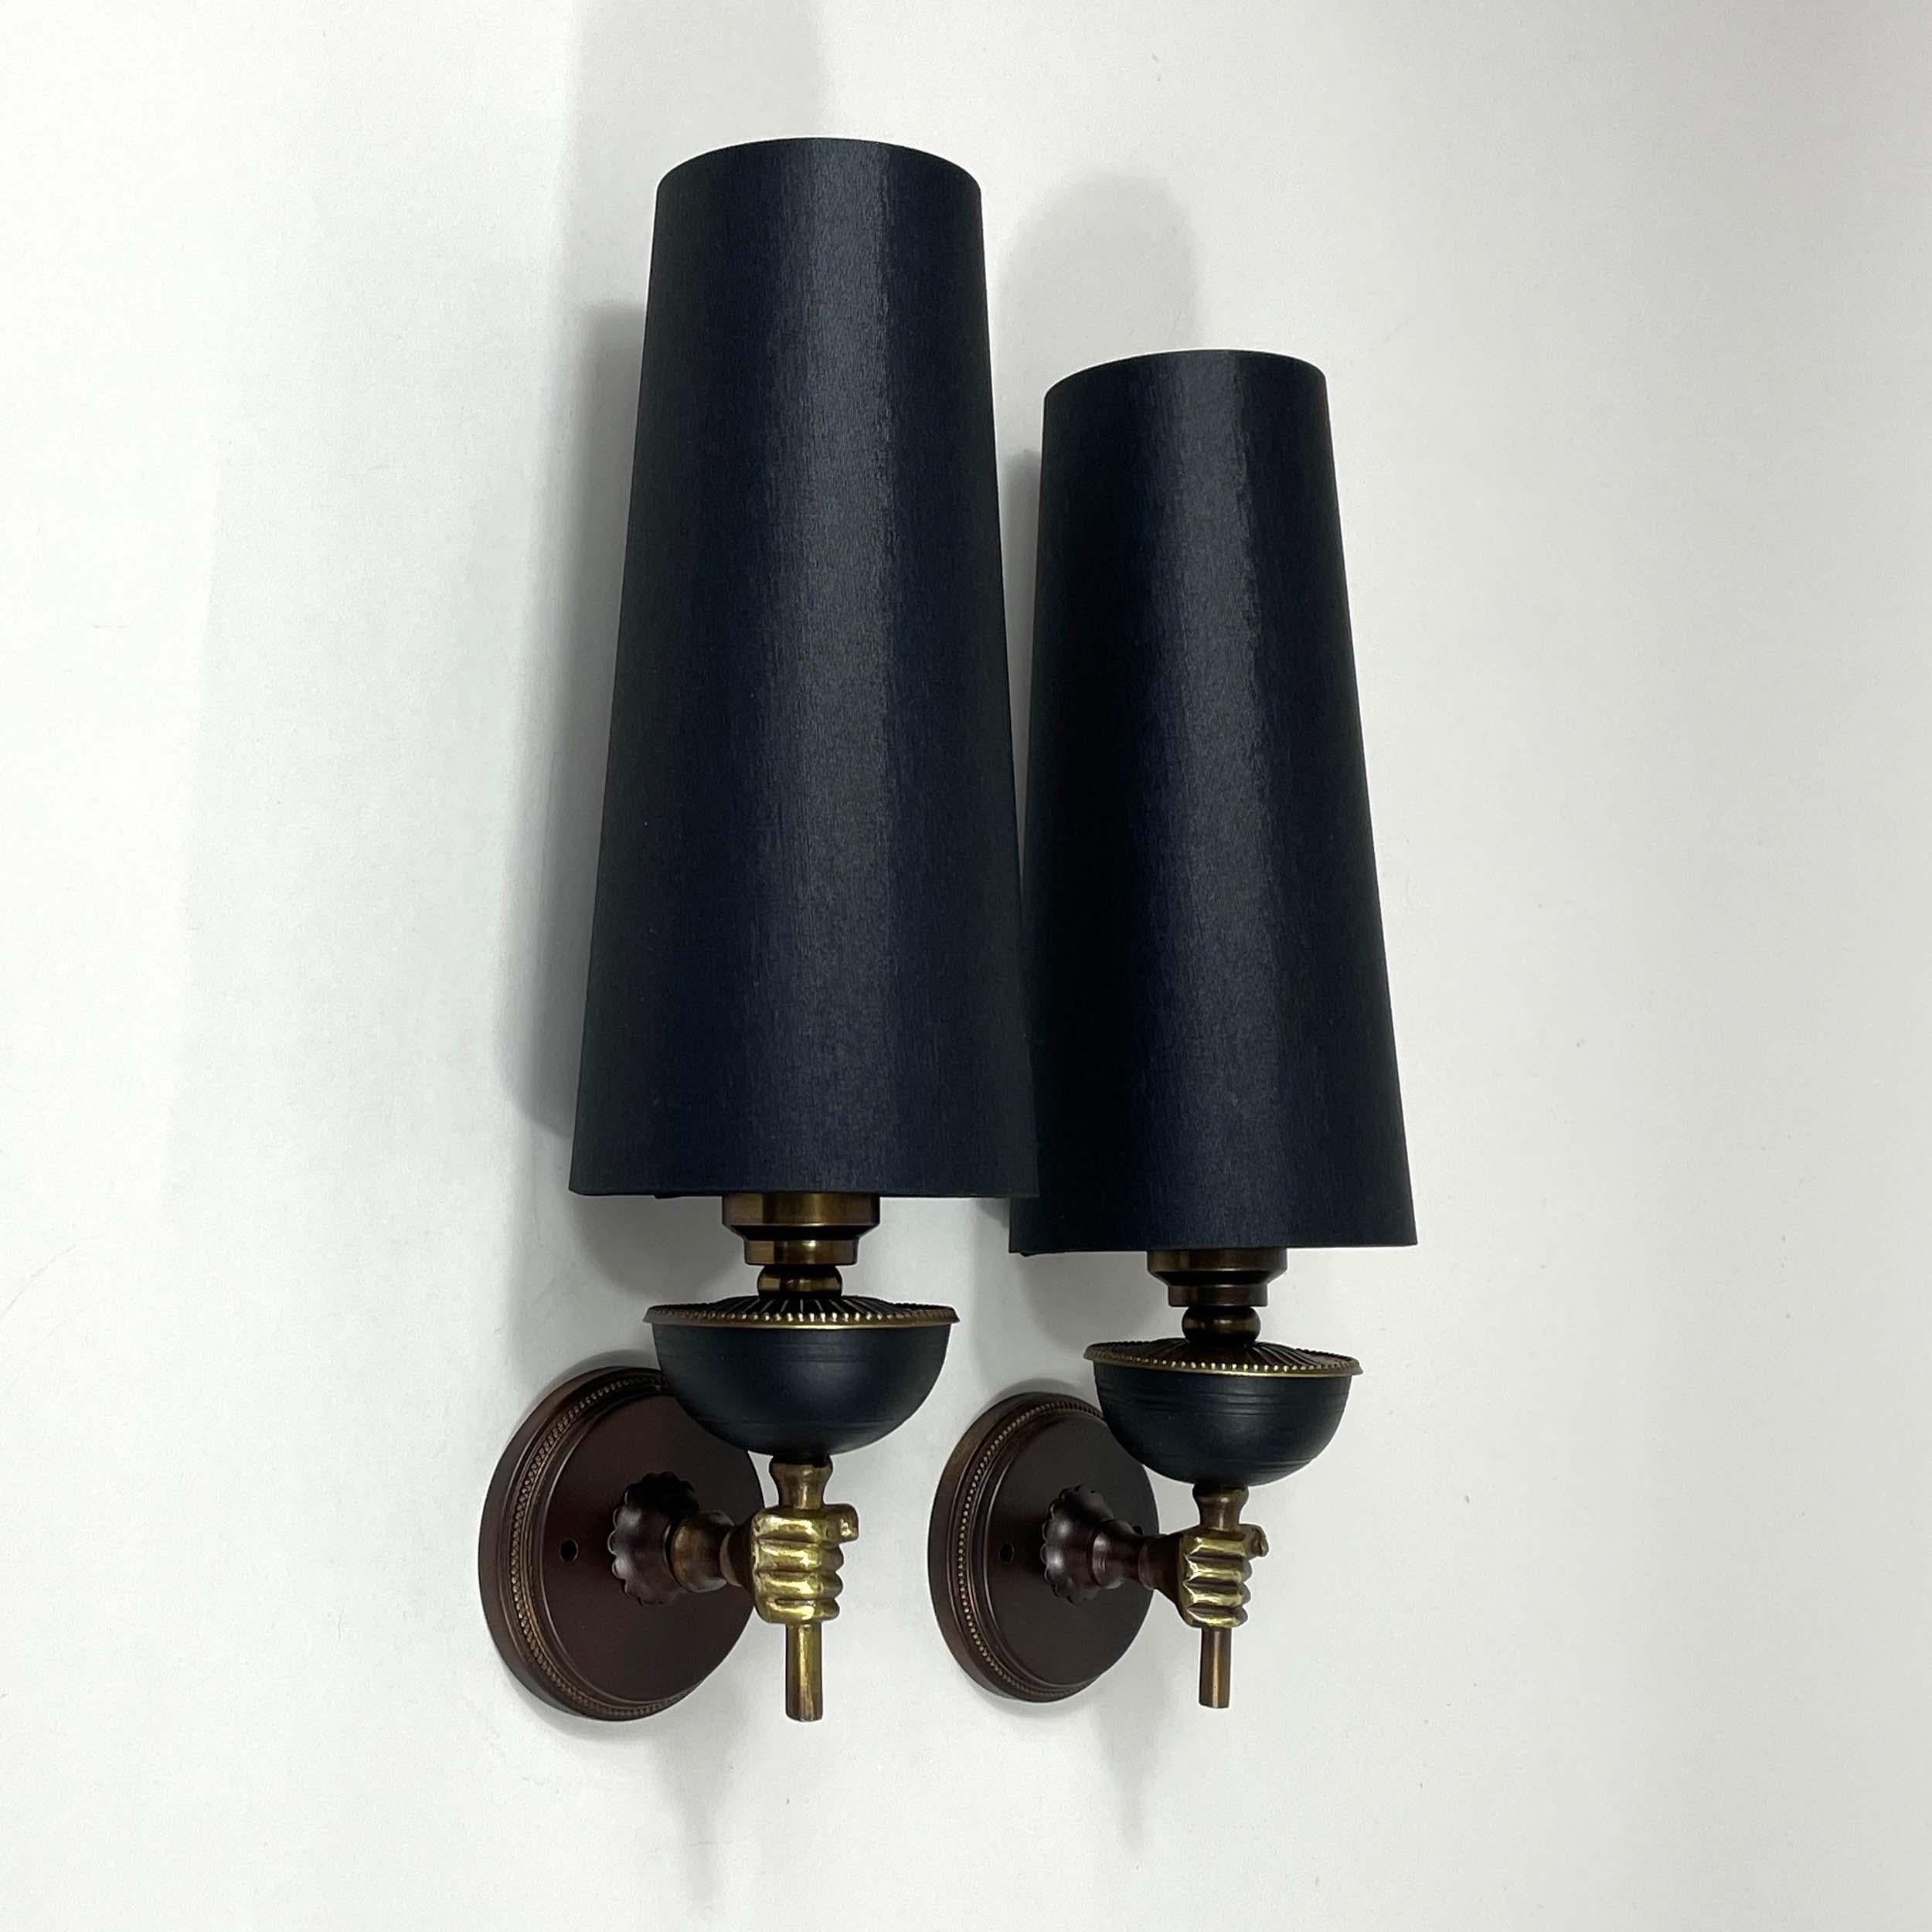 These unusual vintage sconces were designed and manufactured in France in the 1950s. They feature brass / bronzed torchiere lights with (new) hand made black silk fabric lamp shades.

Wired for use in US, Europe and Asia the lights require one E14